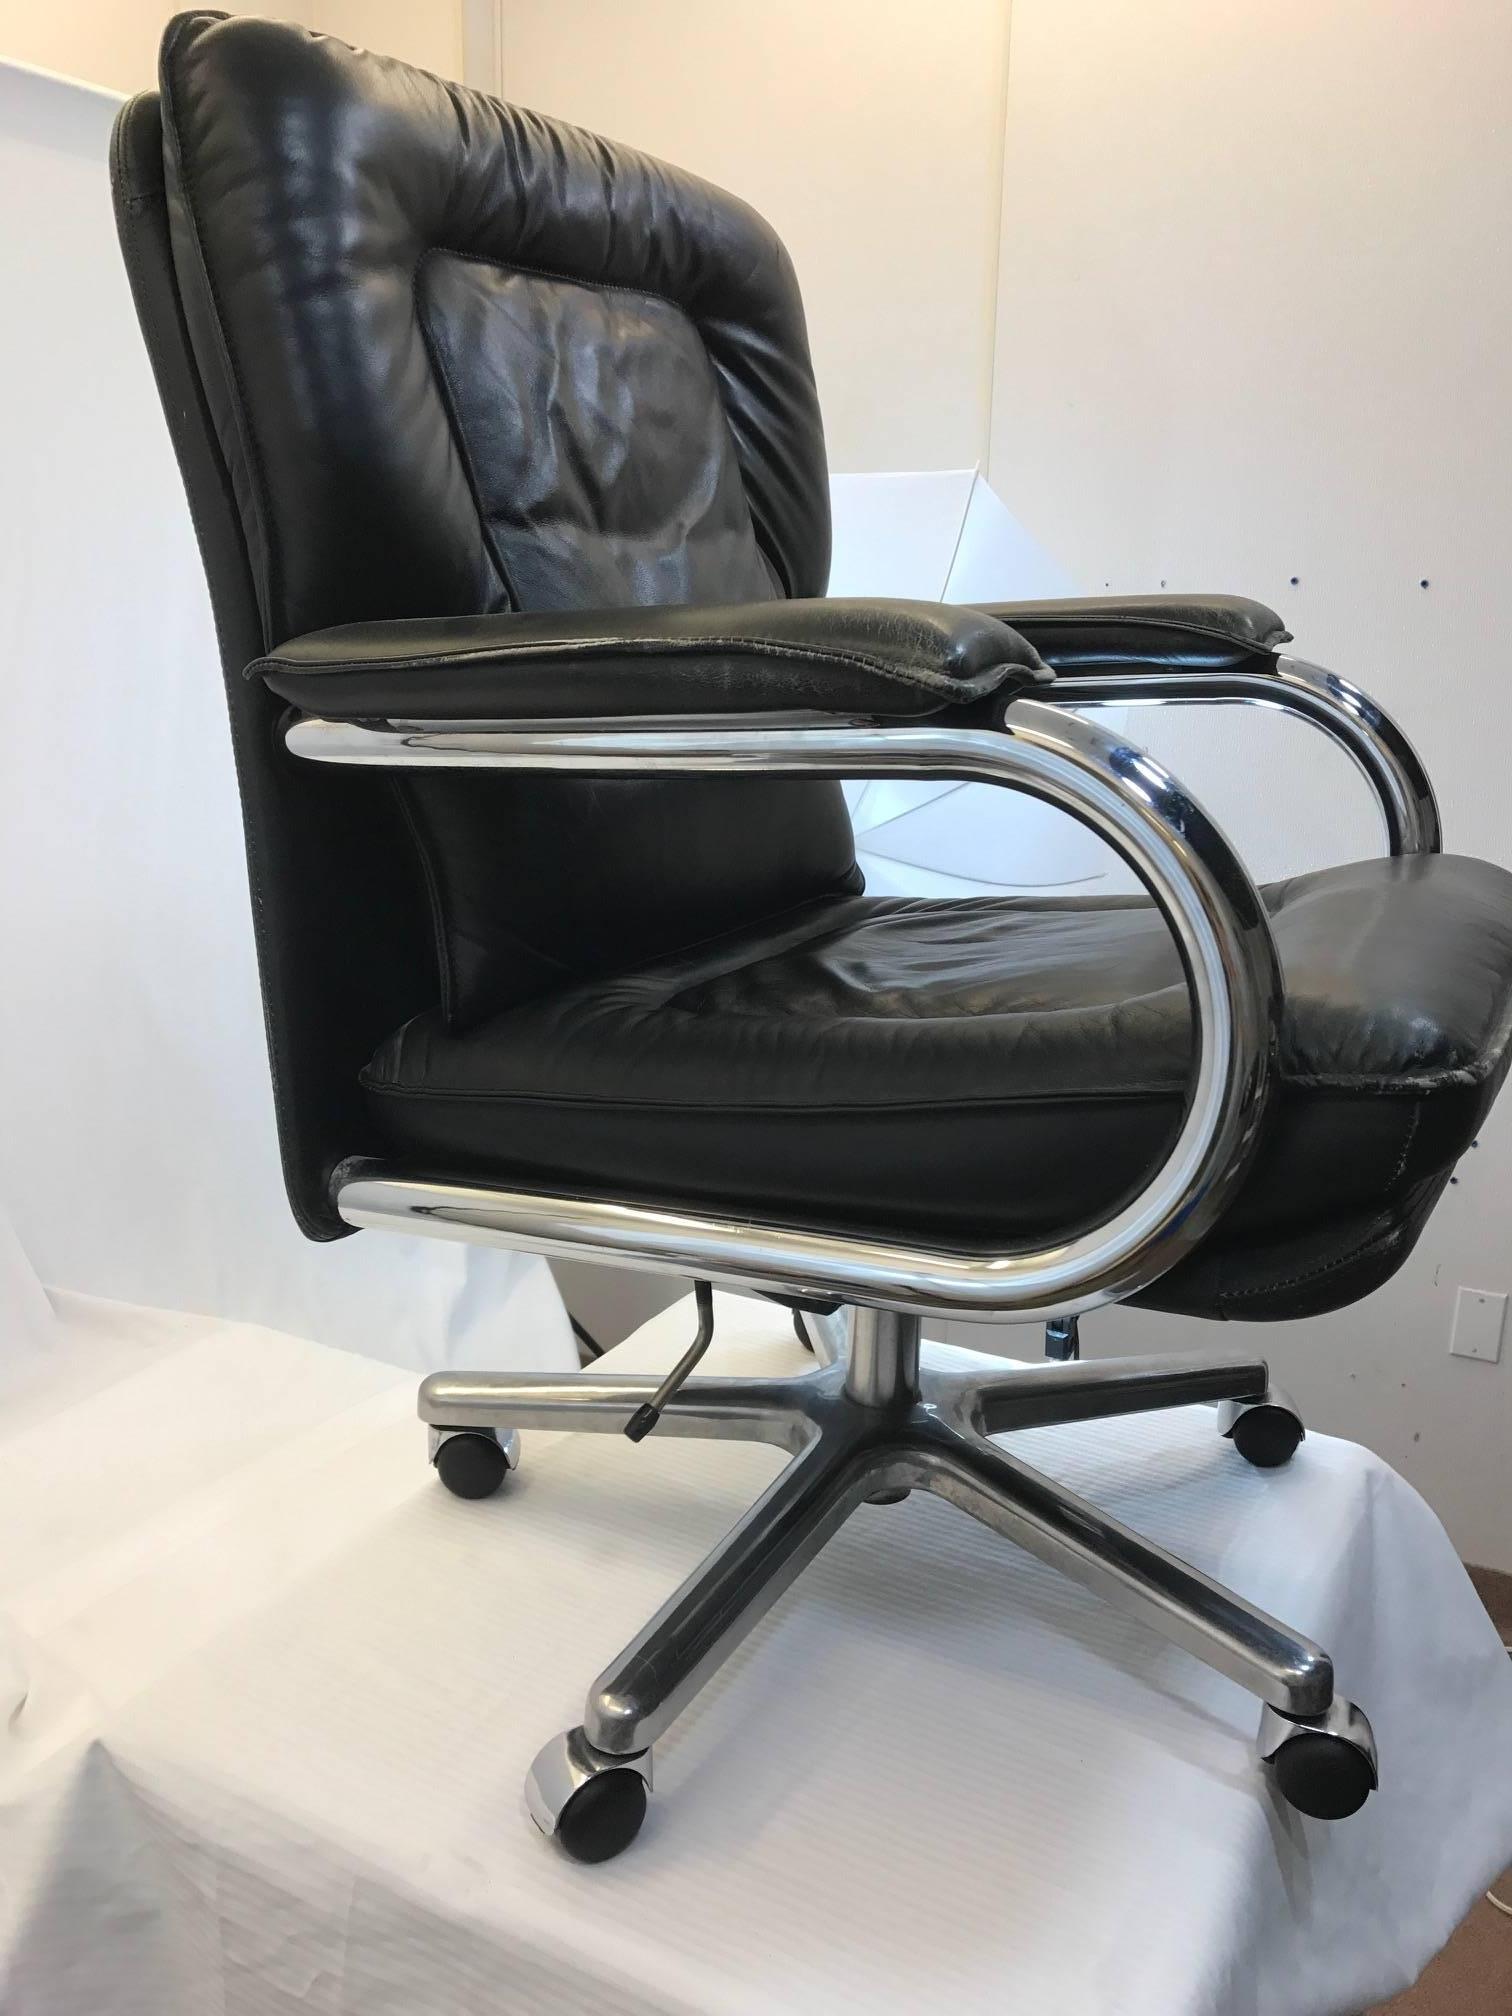 This Mariani leather desk chair is completely comfortable. The leather on the arms is worn but intact; the leather on the rest of the chair is in good condition. A handsome chair that with refurbishing will last another lifetime or two.
echrome